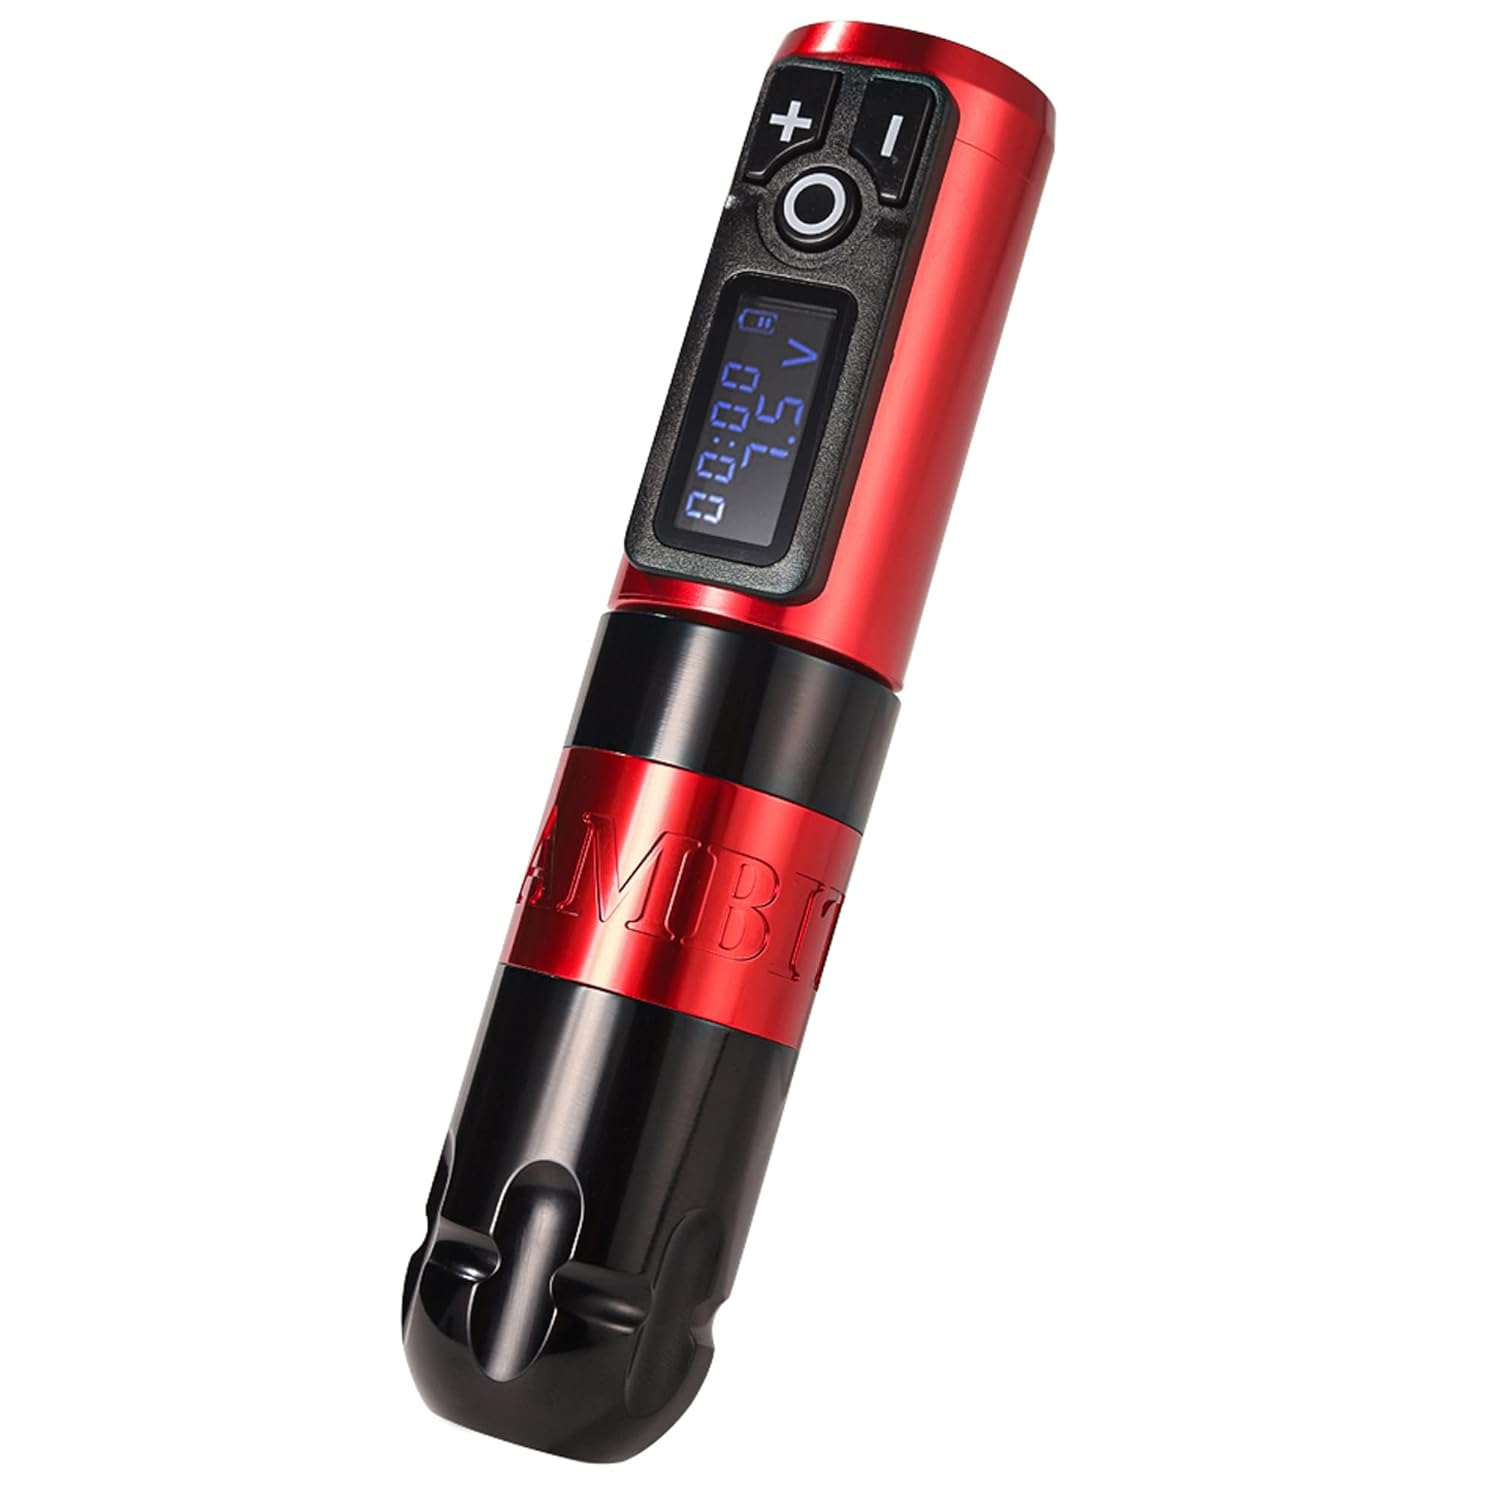 Ambition Soldier Red Rotary Wireless Tattoo Pen Machine